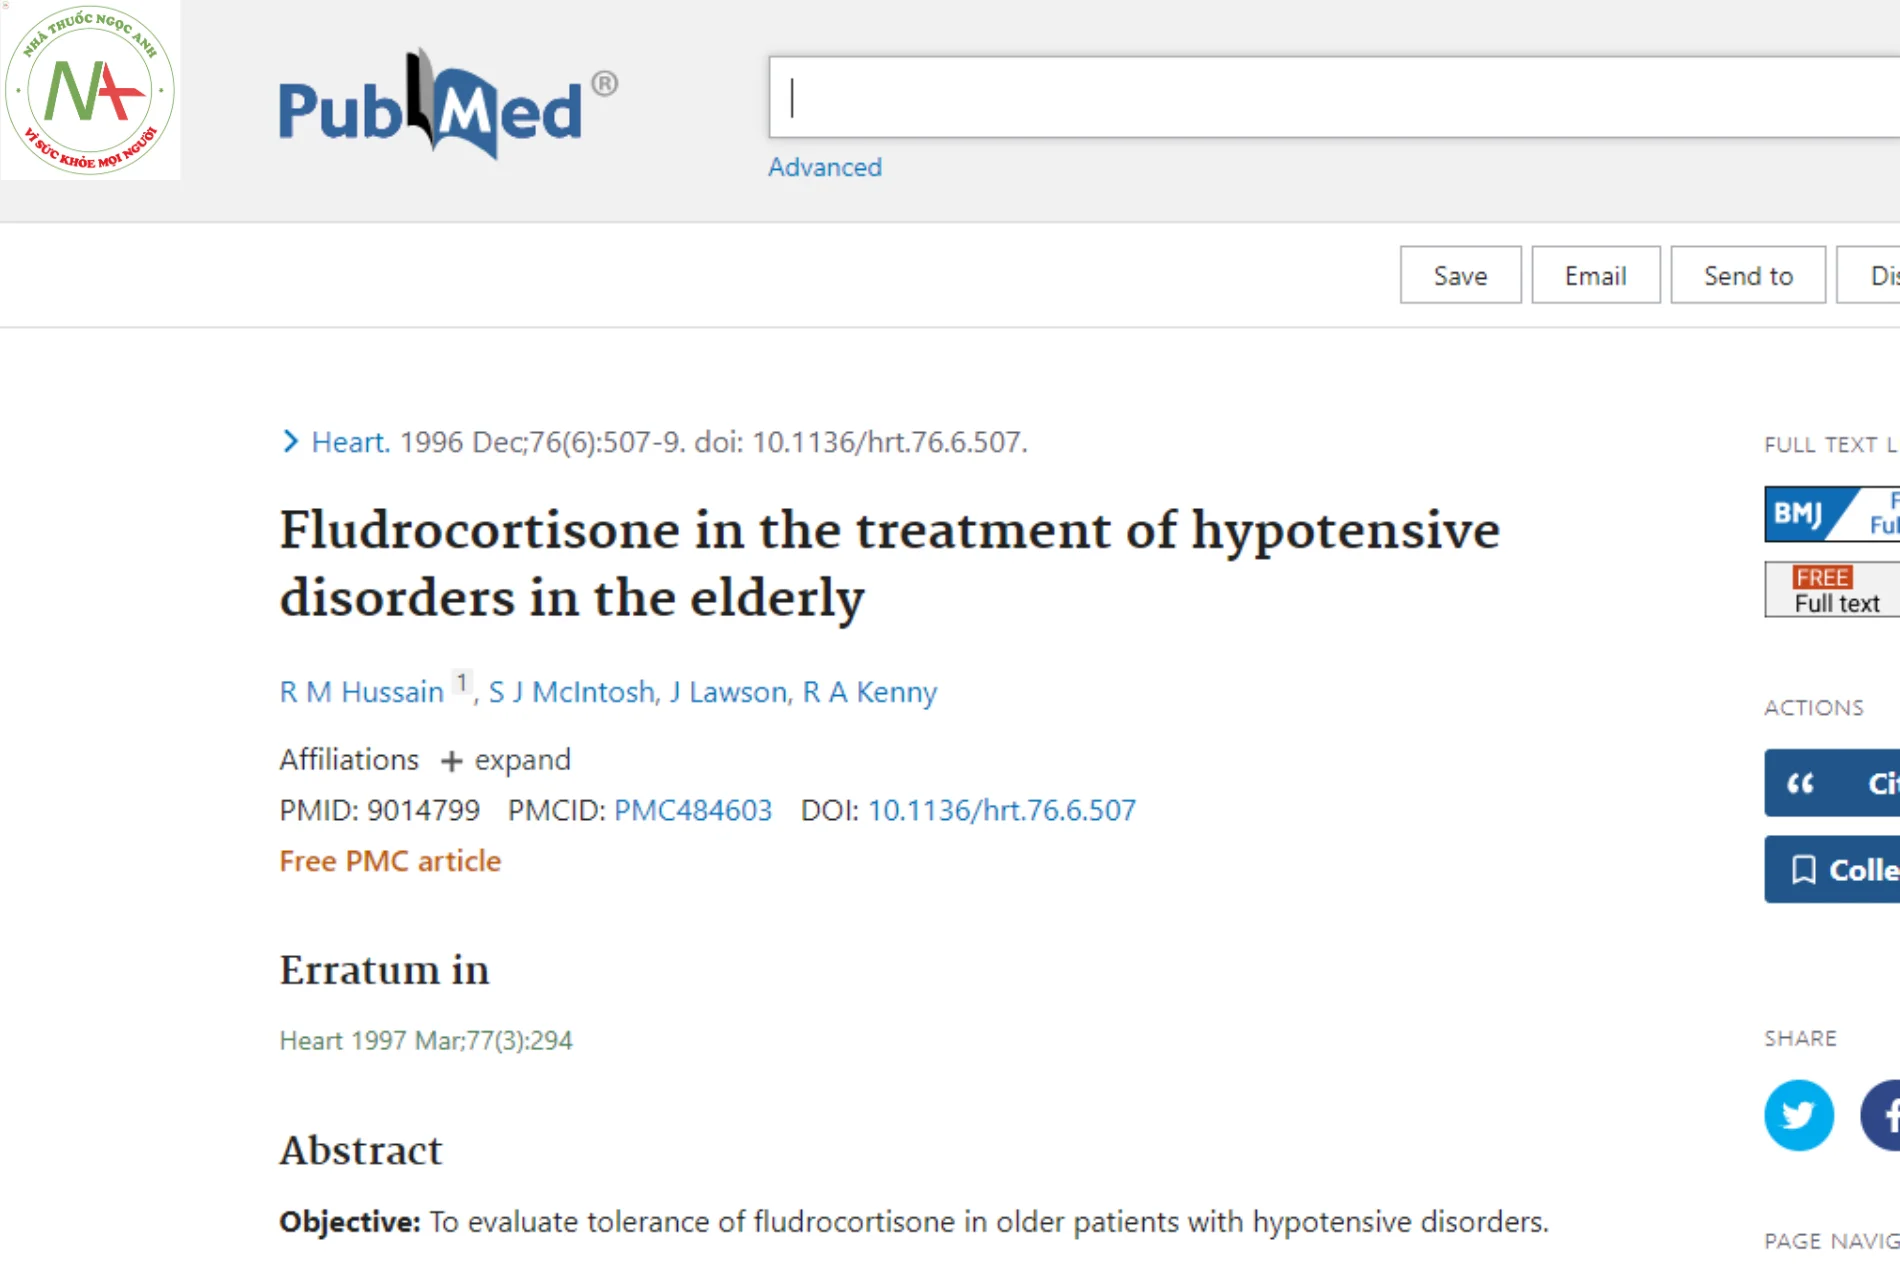 Fludrocortisone in the treatment of hypotensive disorders in the elderly